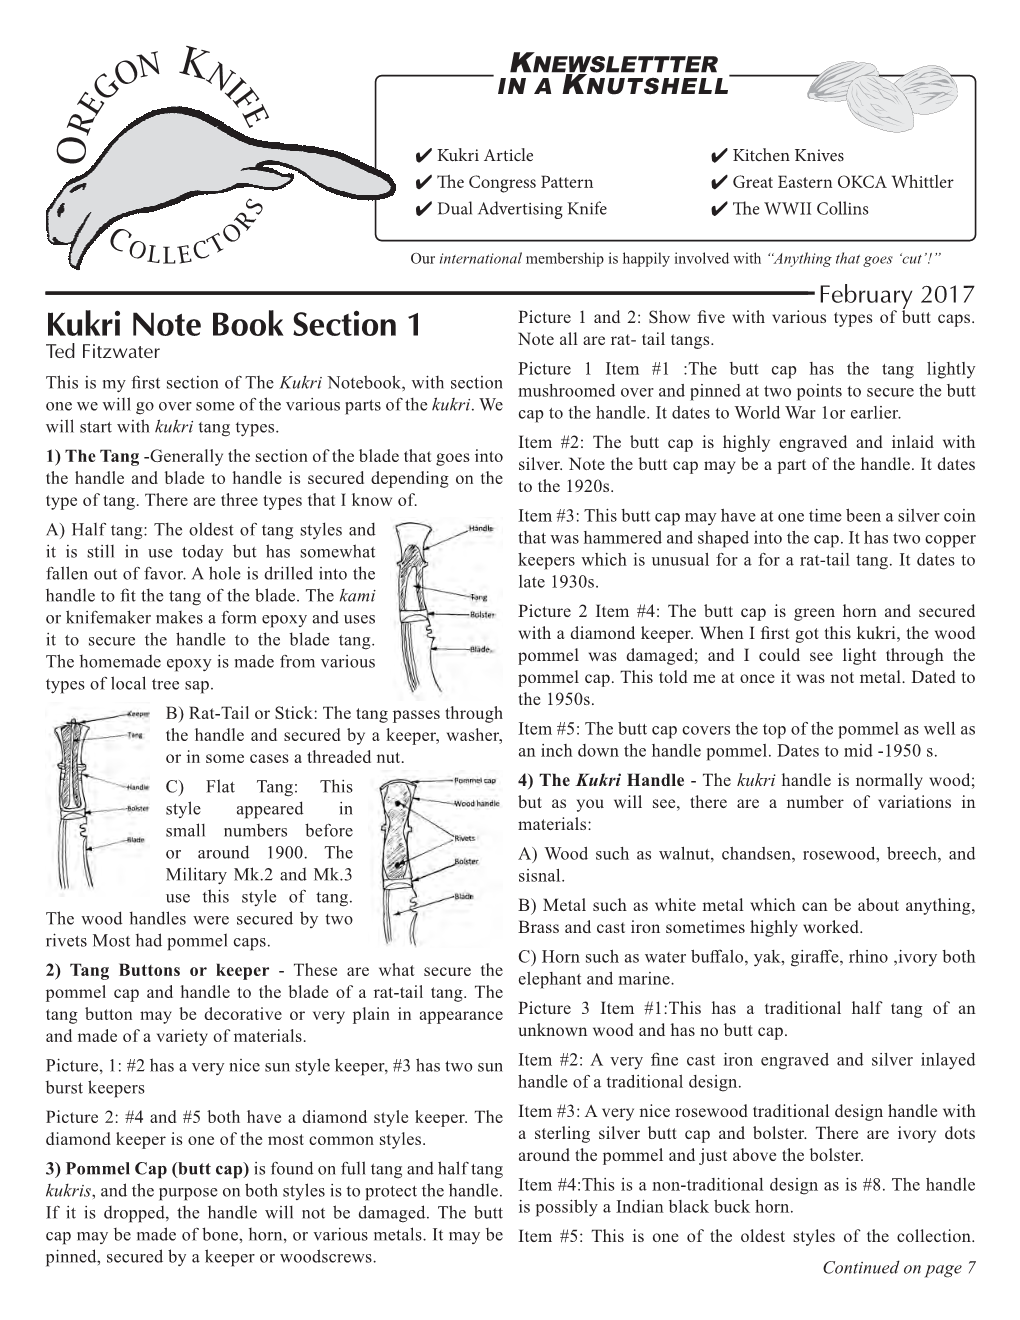 Kukri Note Book Section 1 Note All Are Rat- Tail Tangs